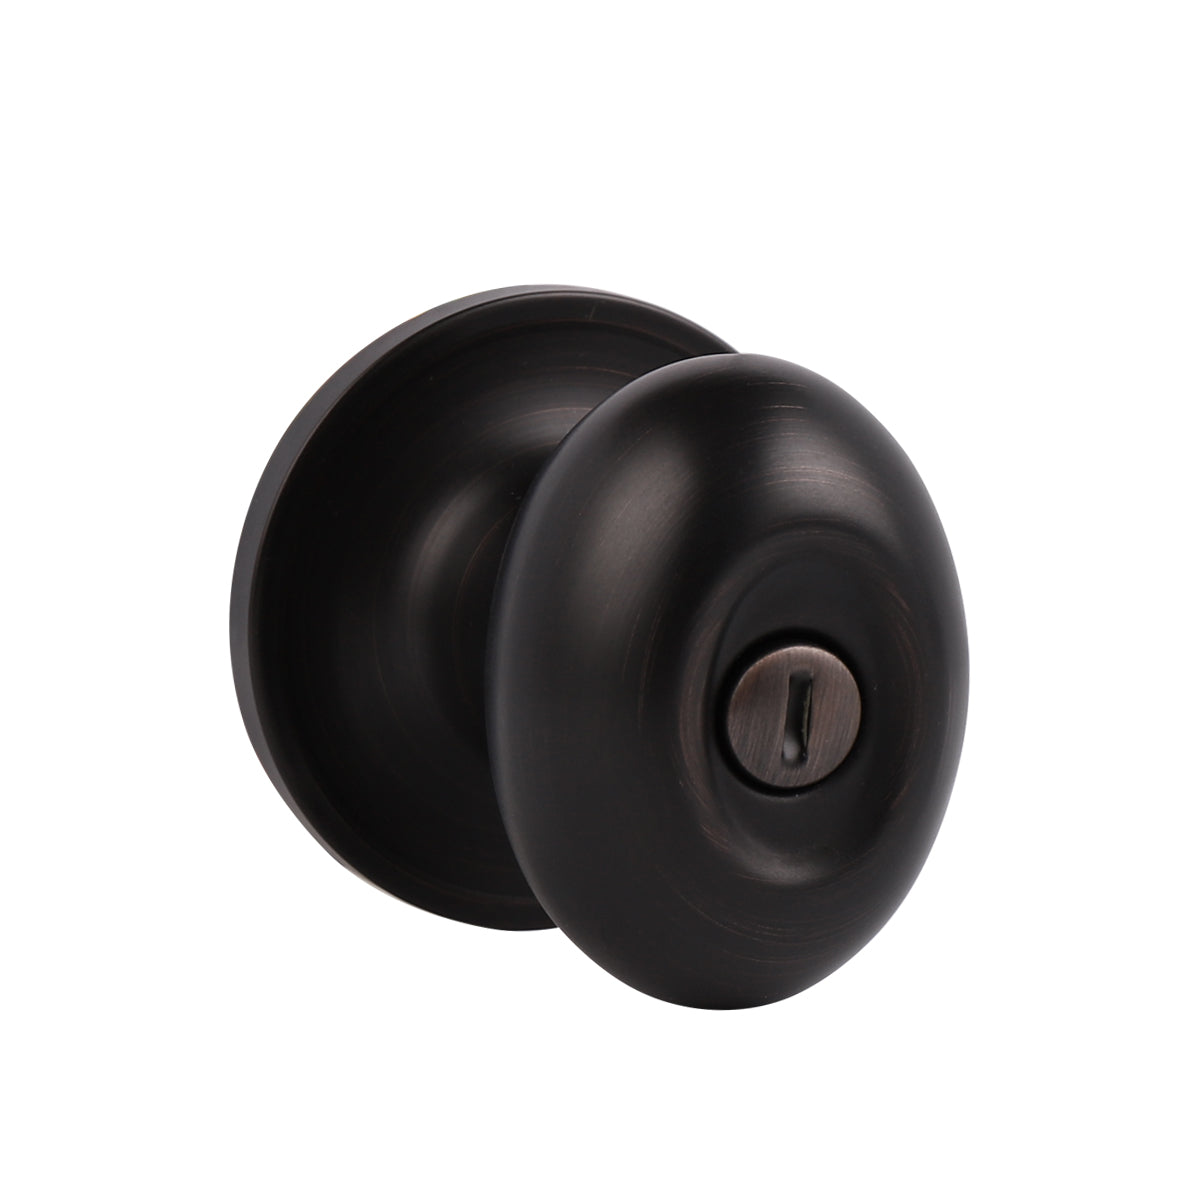 Oval Ball Style Door Knob Privacy Oil Rubbed Bronze Finish DL692ORBBK